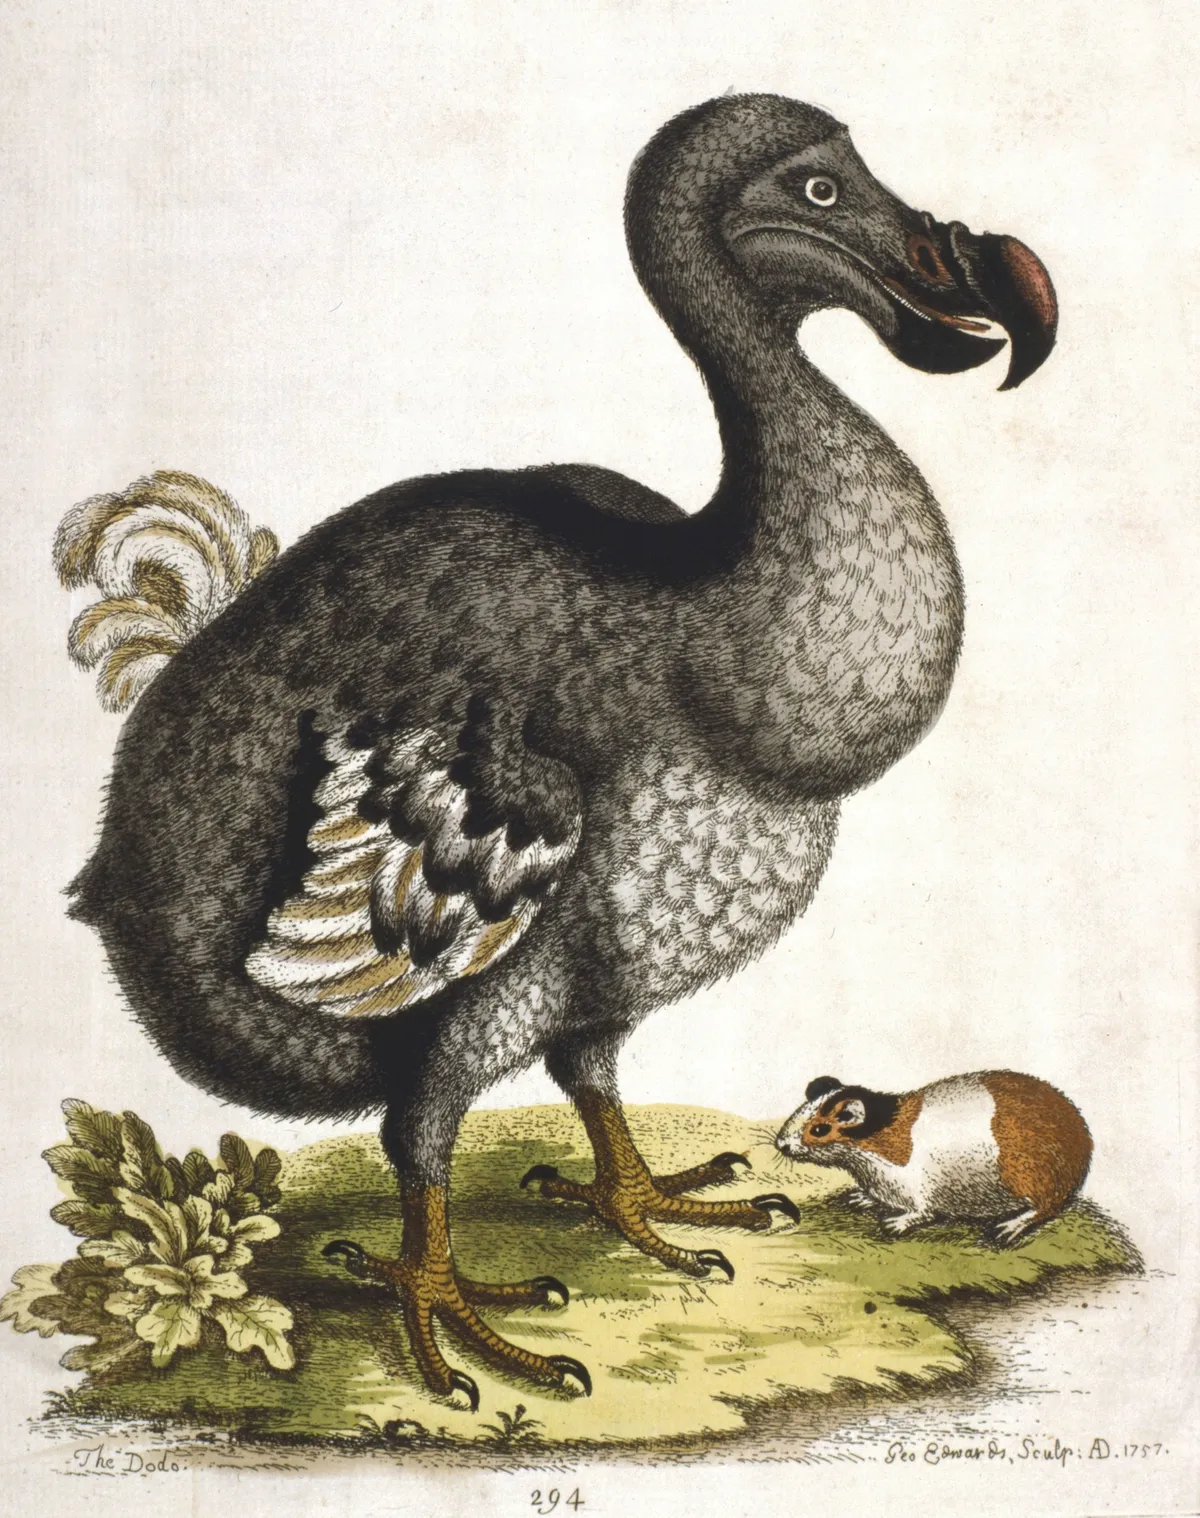 Ecosystem of the dodo uncovered - Discover Wildlife